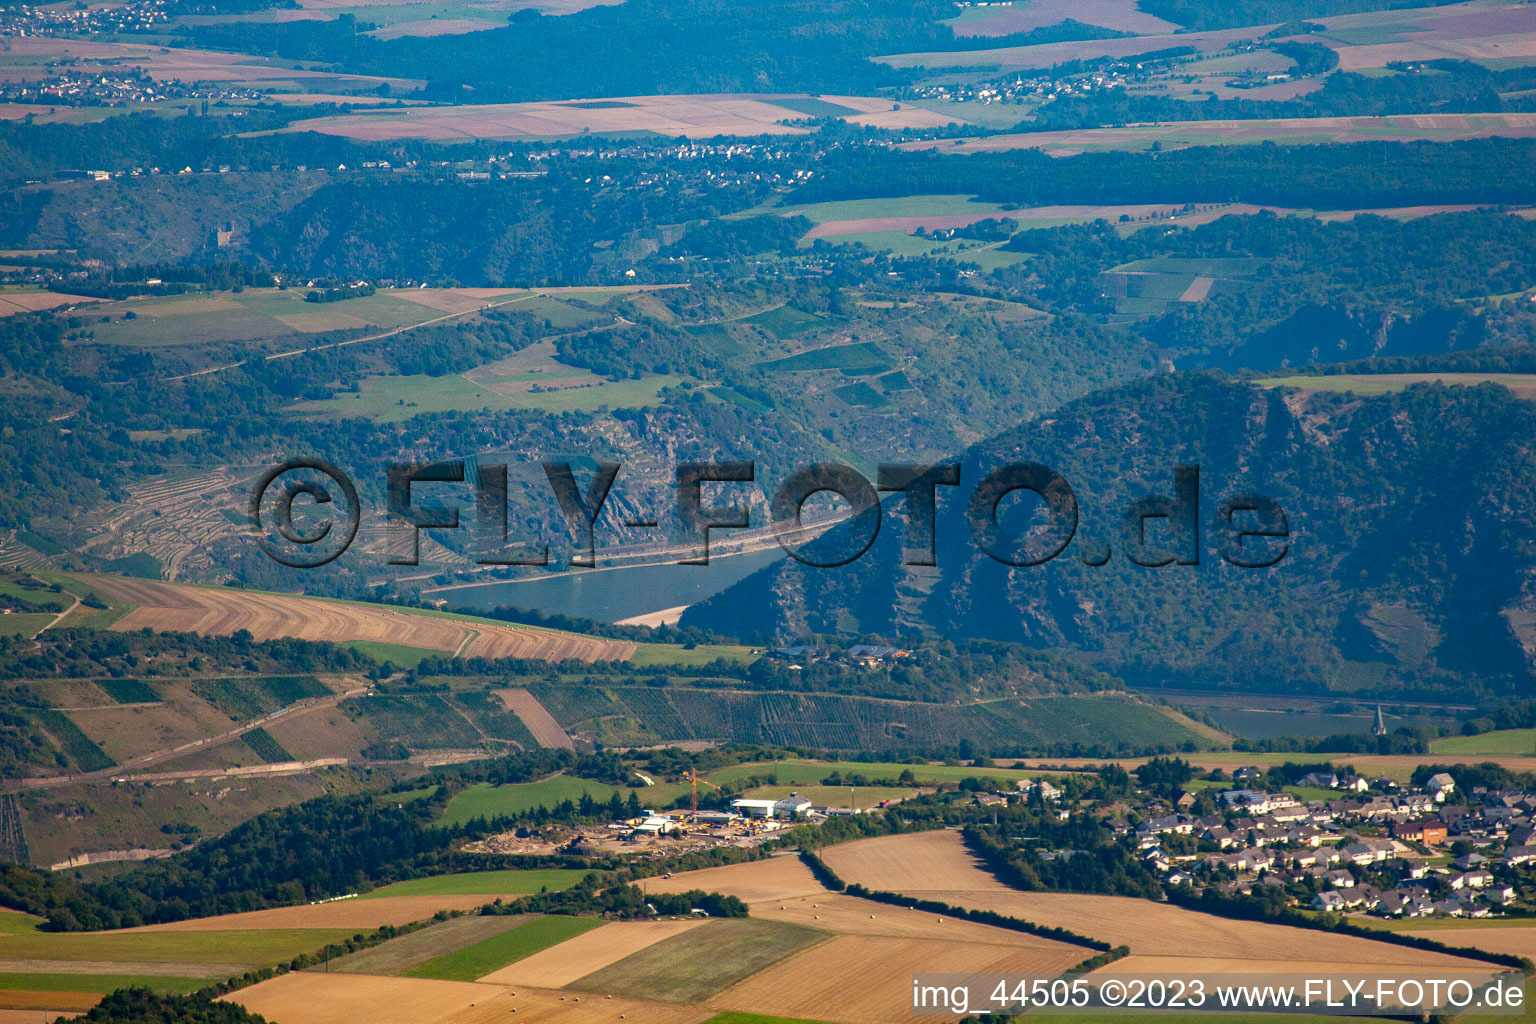 Aerial photograpy of Loreley in the state Rhineland-Palatinate, Germany